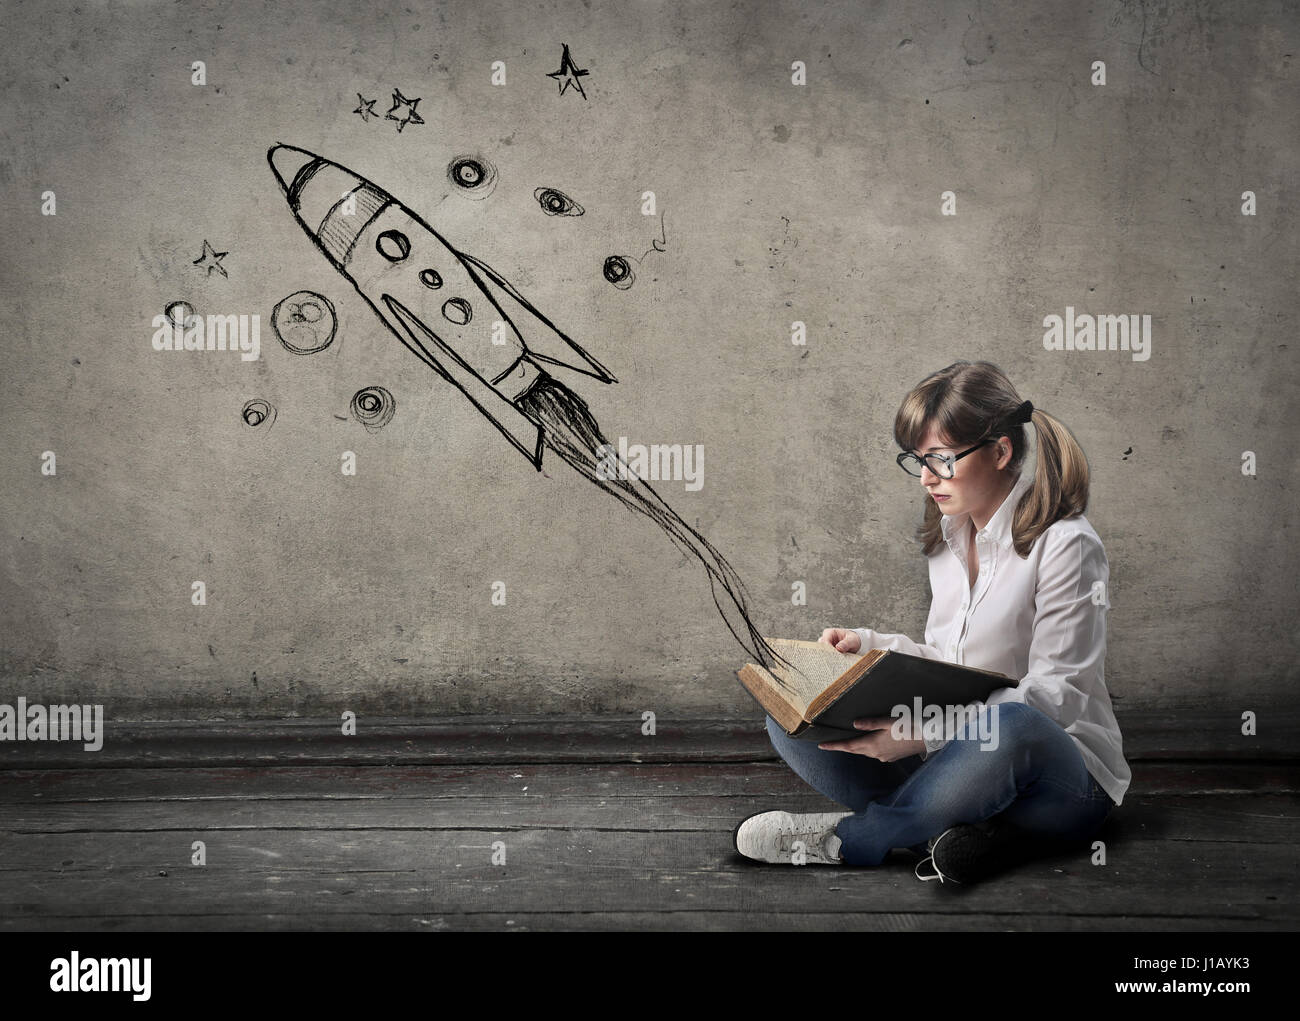 Girl reading book with imaginary rocket Stock Photo